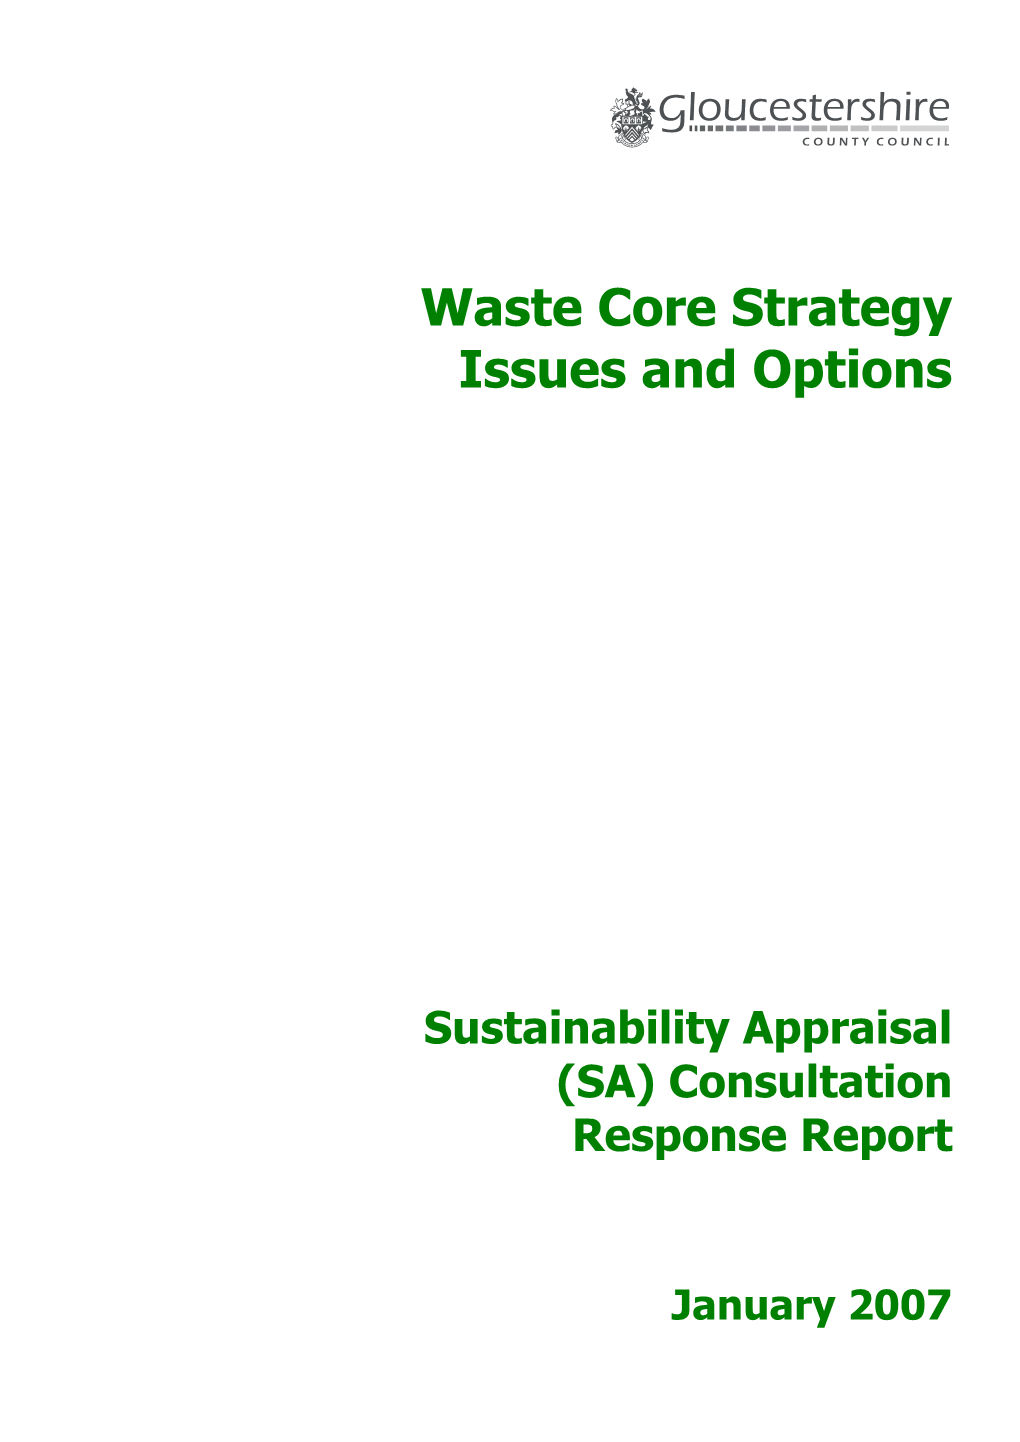 Waste Core Strategy Issues and Options